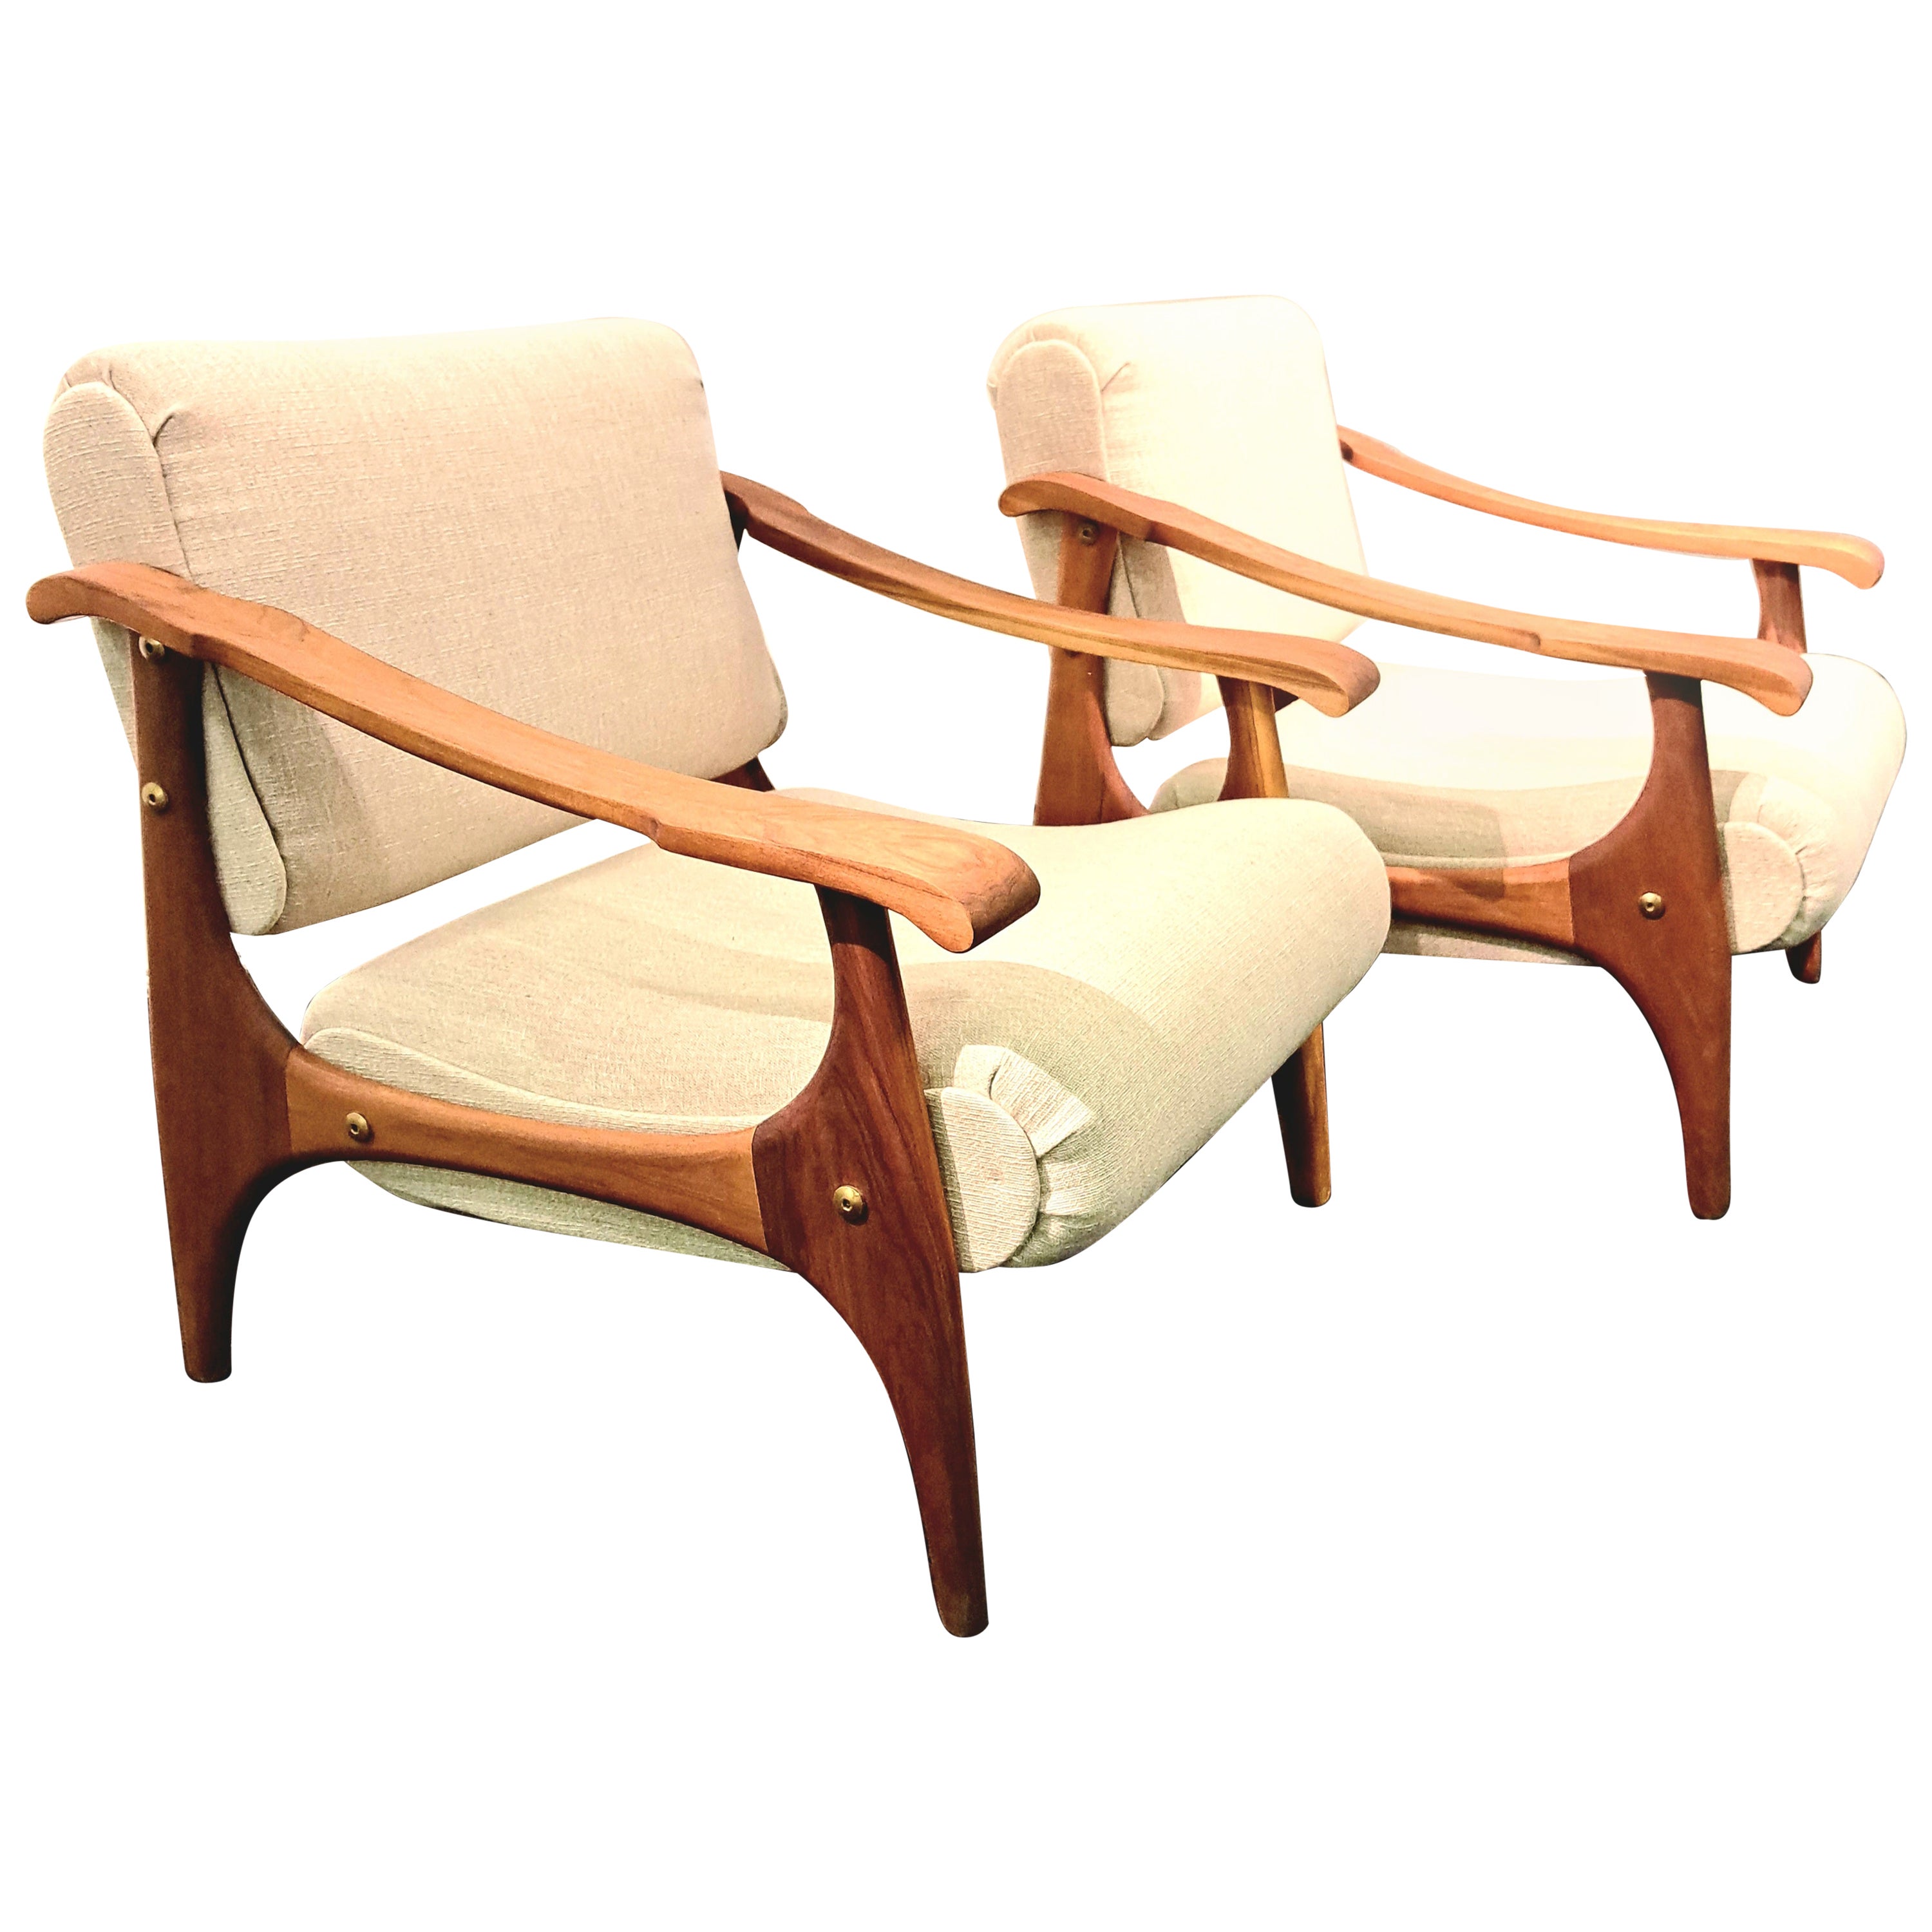 A Pair of Vintage Mid-Century Design lounge chairs, Italy 1970s